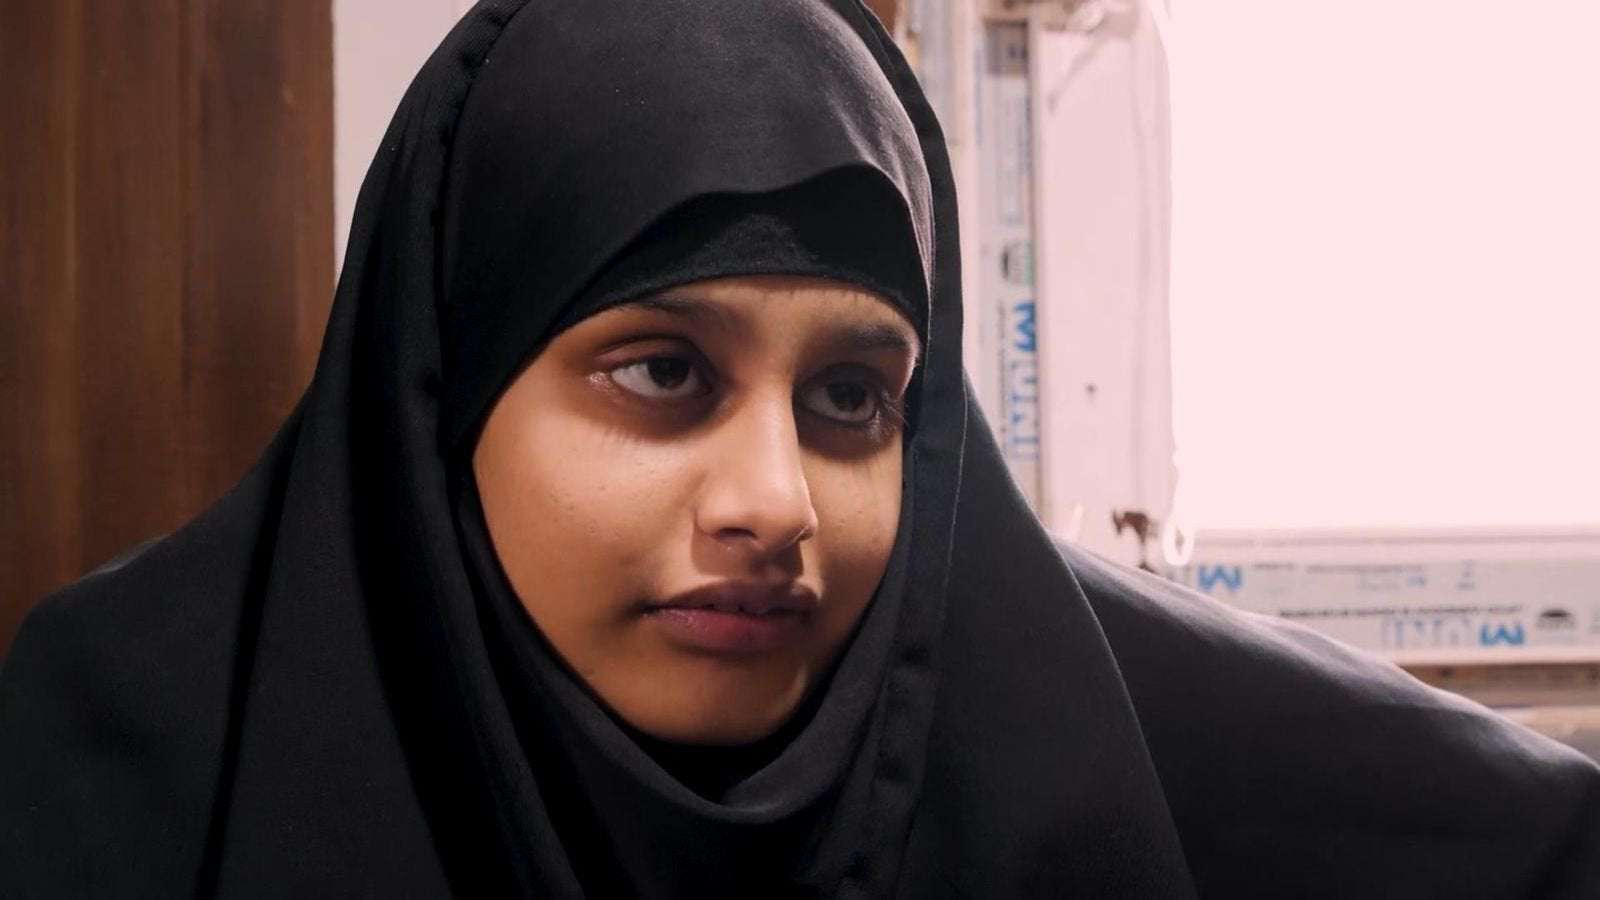 image for Shamima Begum: IS bride 'angry, upset and crying' after court rules she can't return to UK